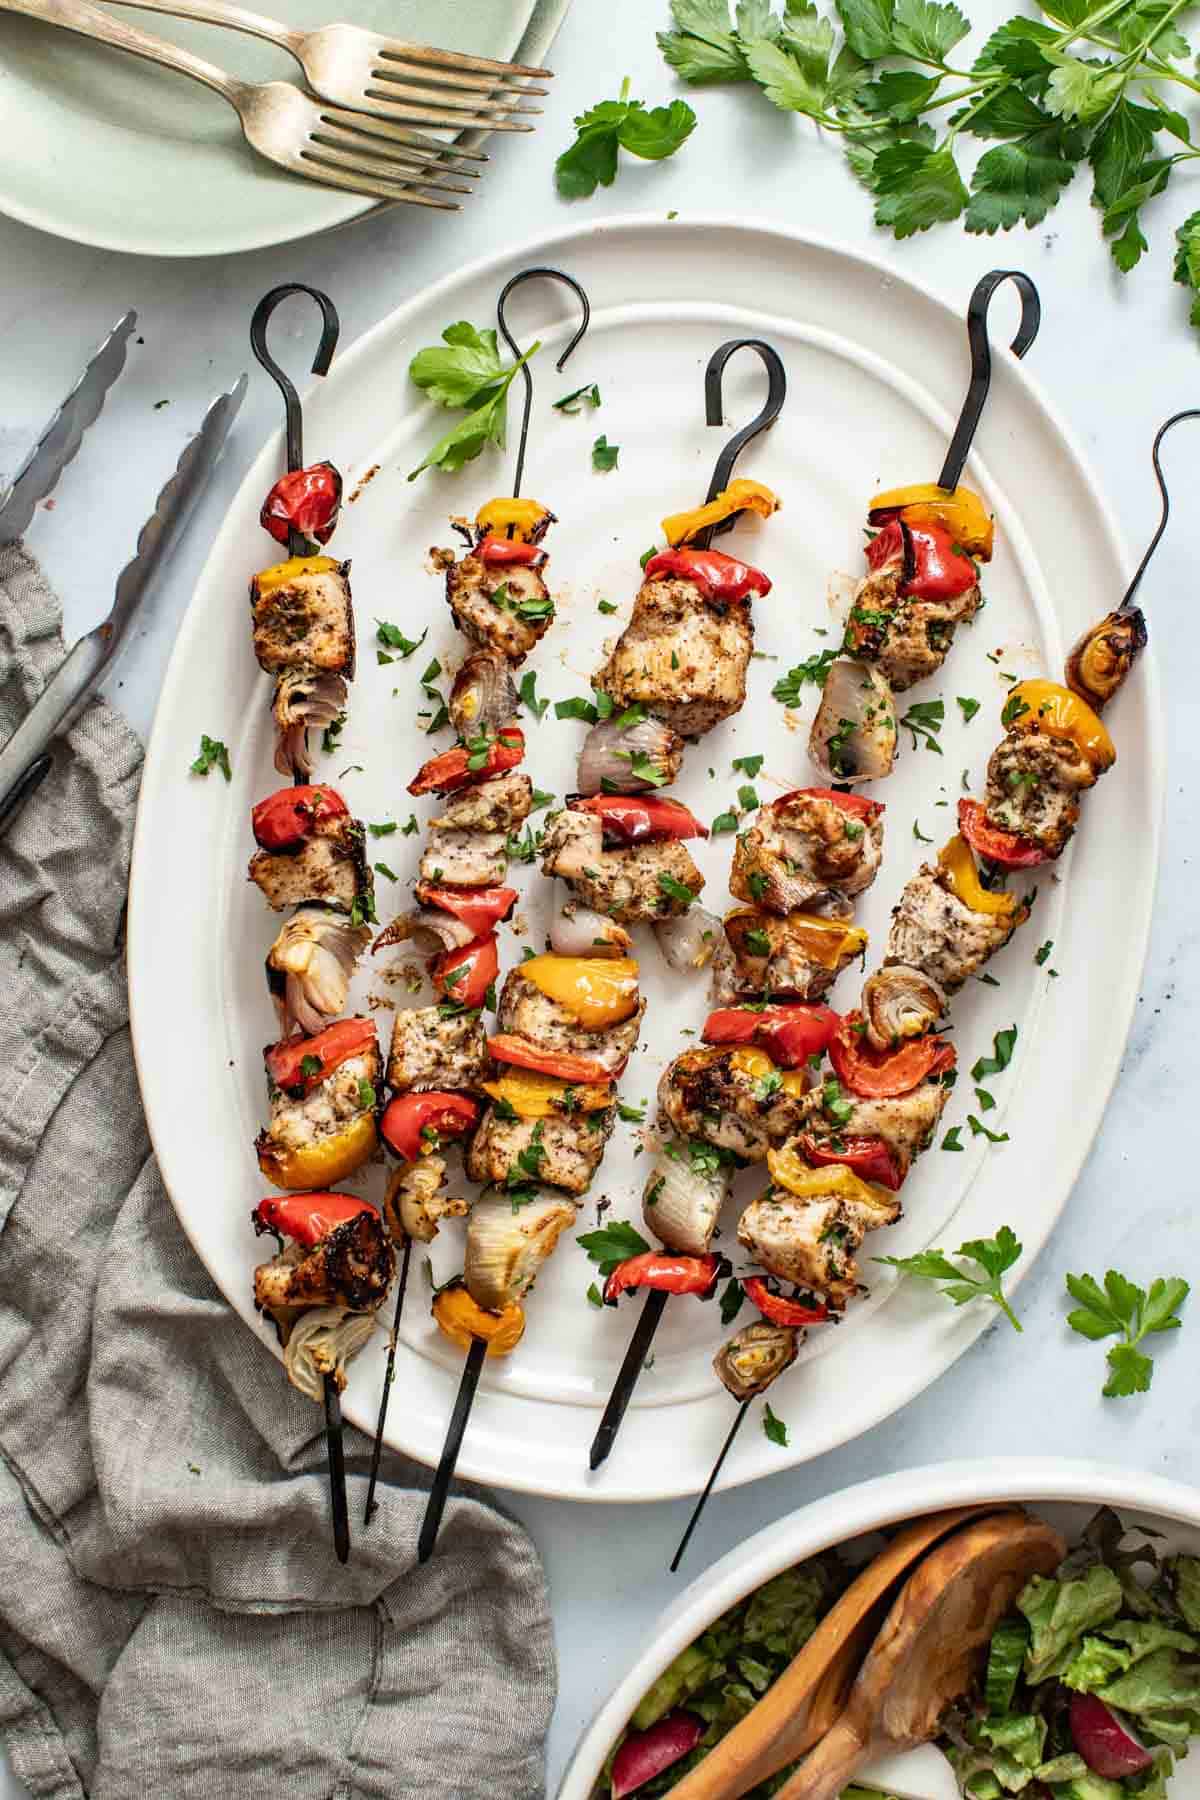 Baked skewers layered with chicken and vegetables, topped with parsley on a white plate.